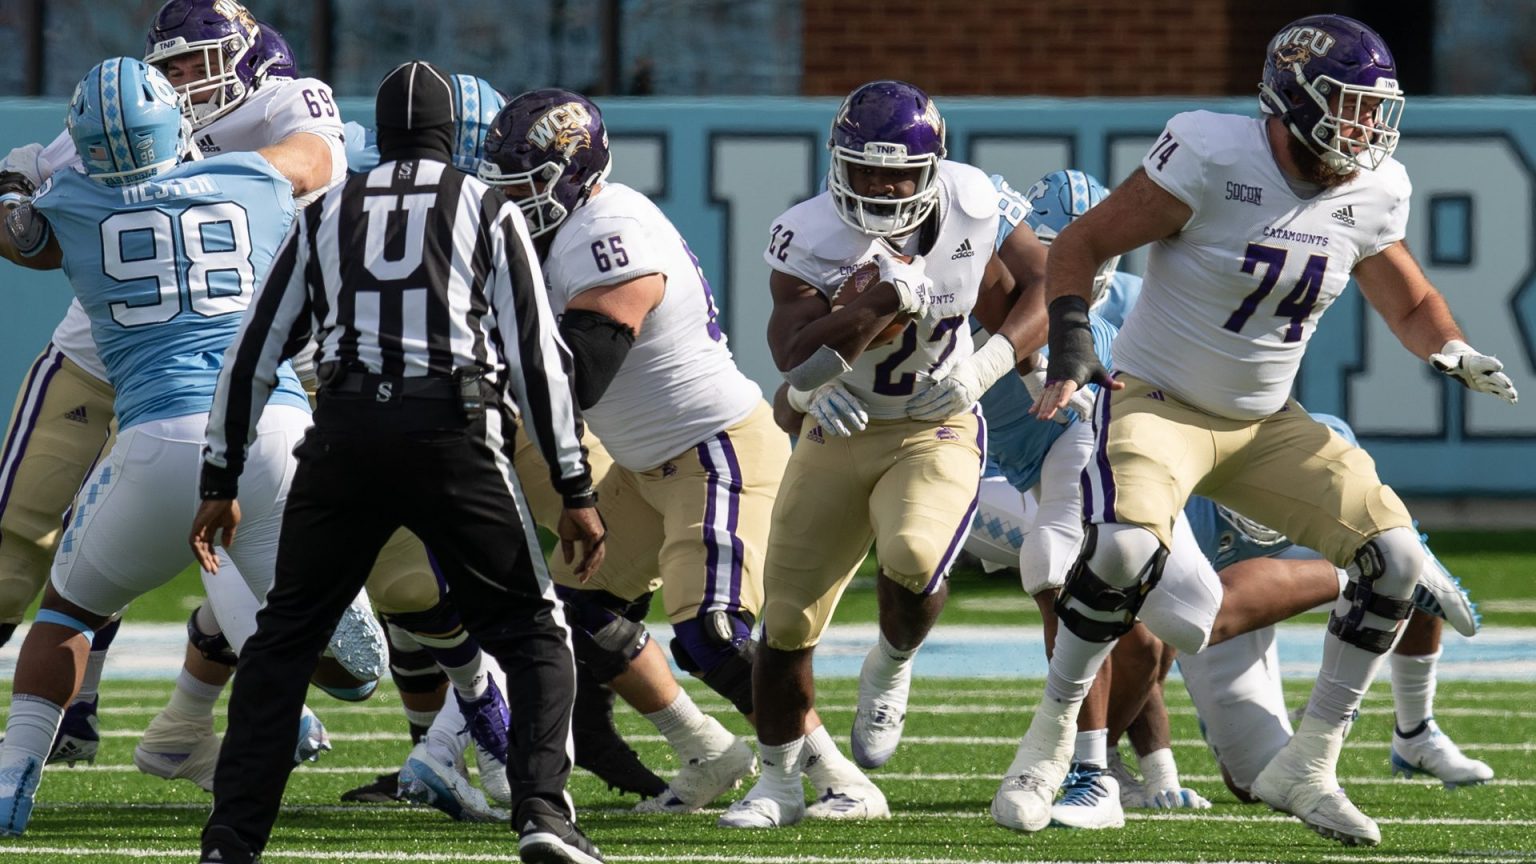 2021 Fcs Season Preview Western Carolina The College Sports Journal 7443